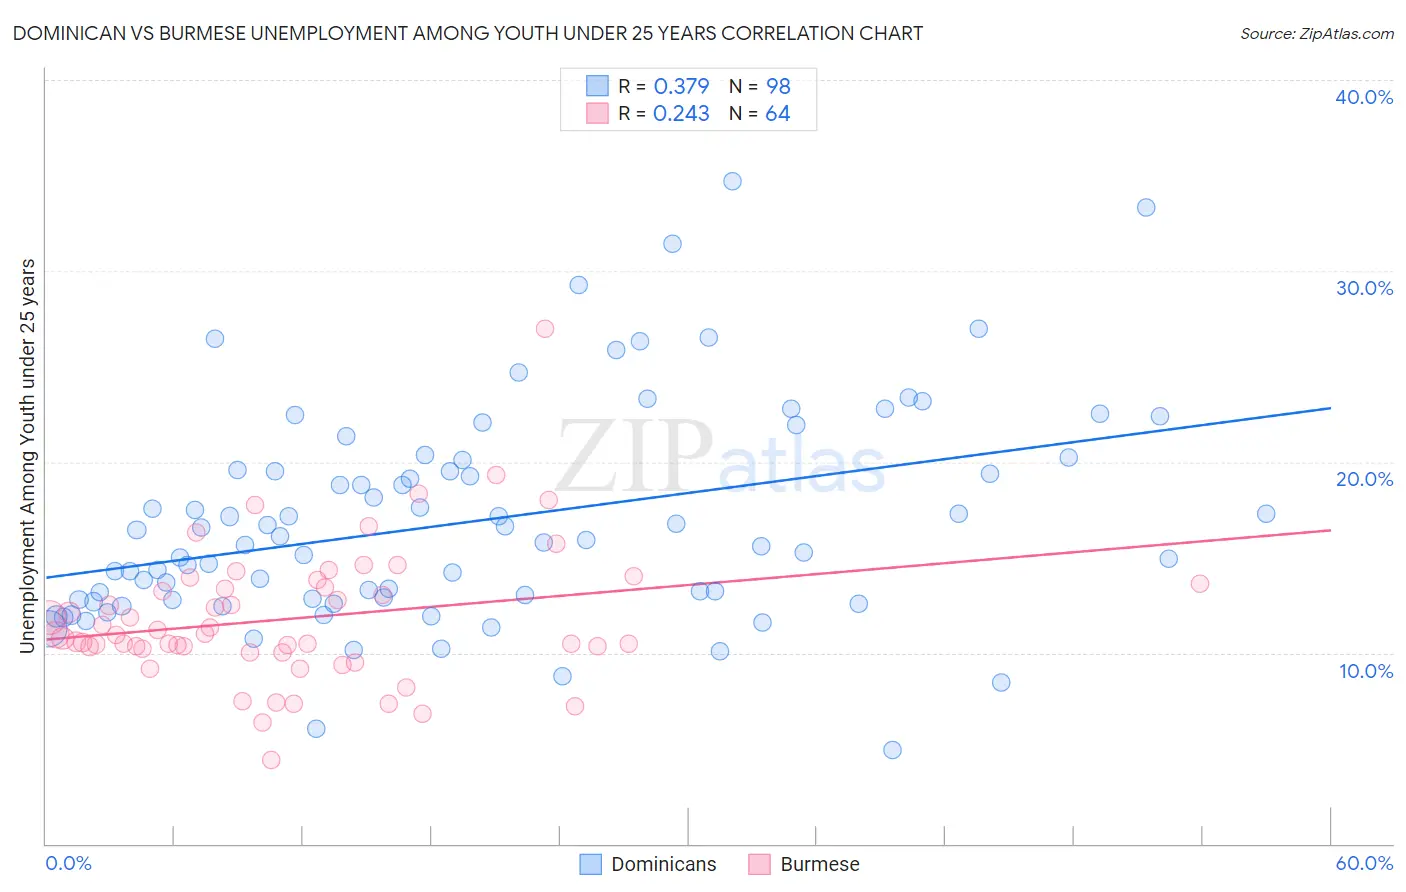 Dominican vs Burmese Unemployment Among Youth under 25 years